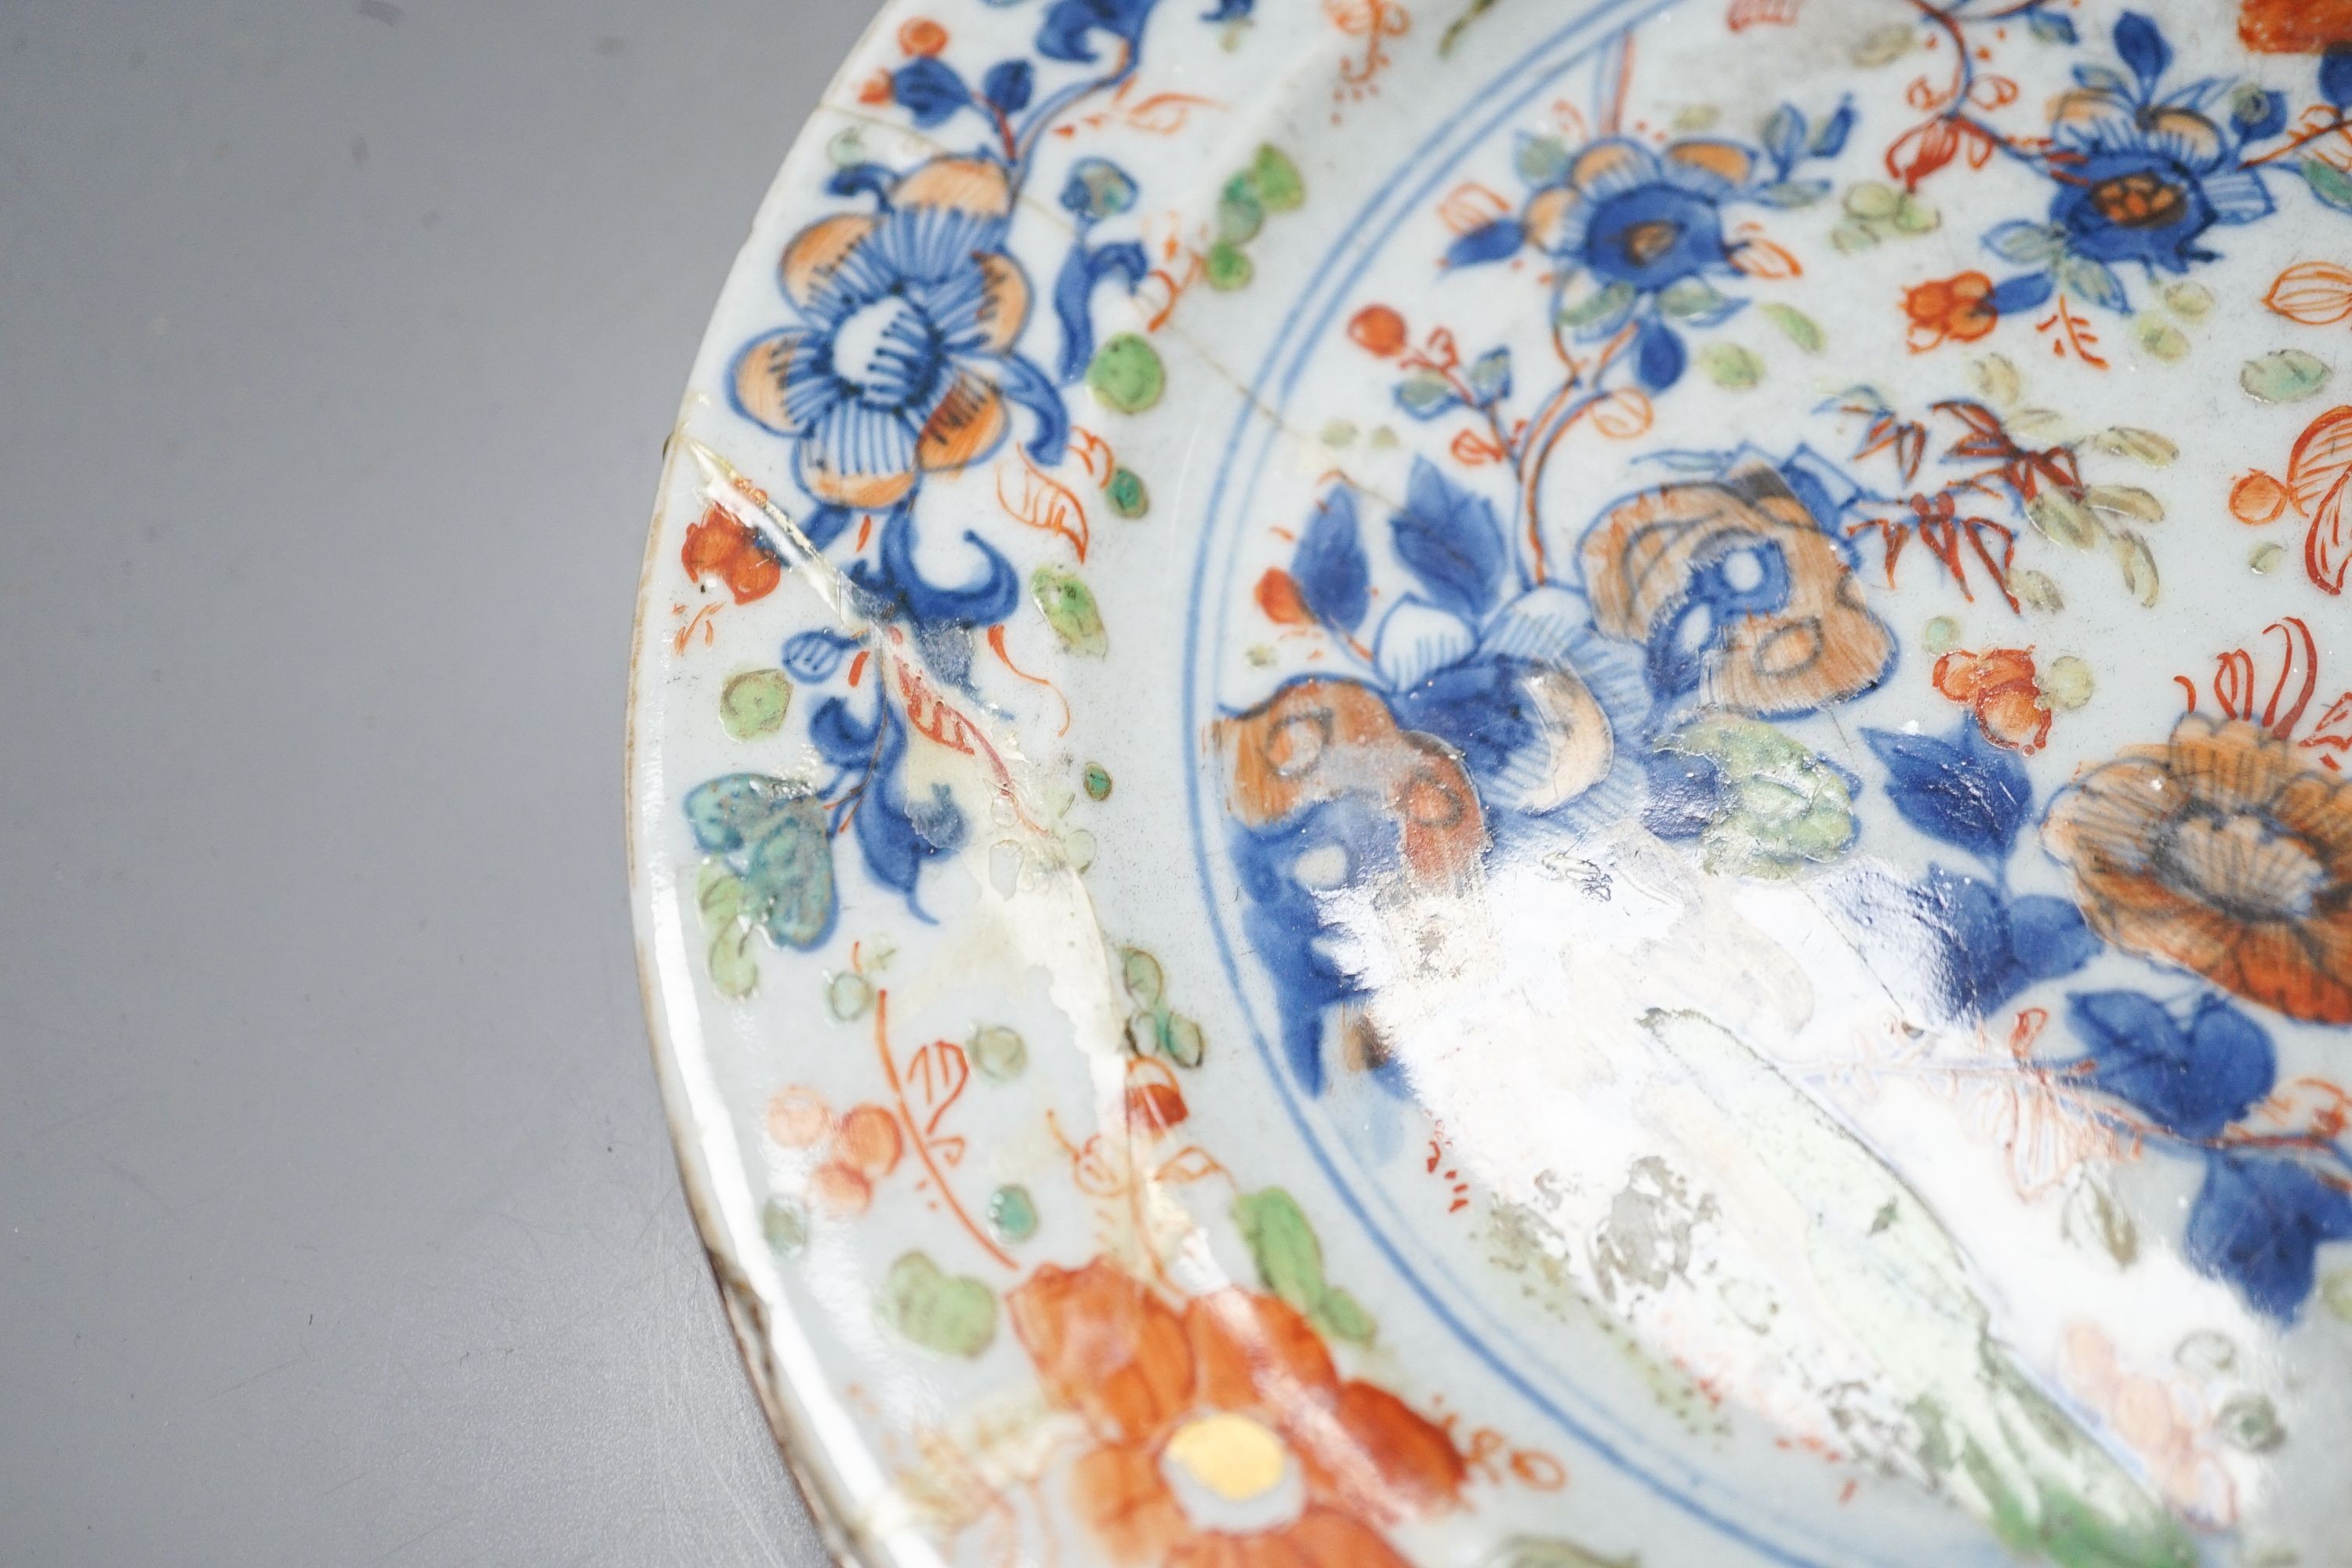 An 18th century Chinese blue and white jar, three 18th century clobbered Chinese plates and a pair of Satsuma vases